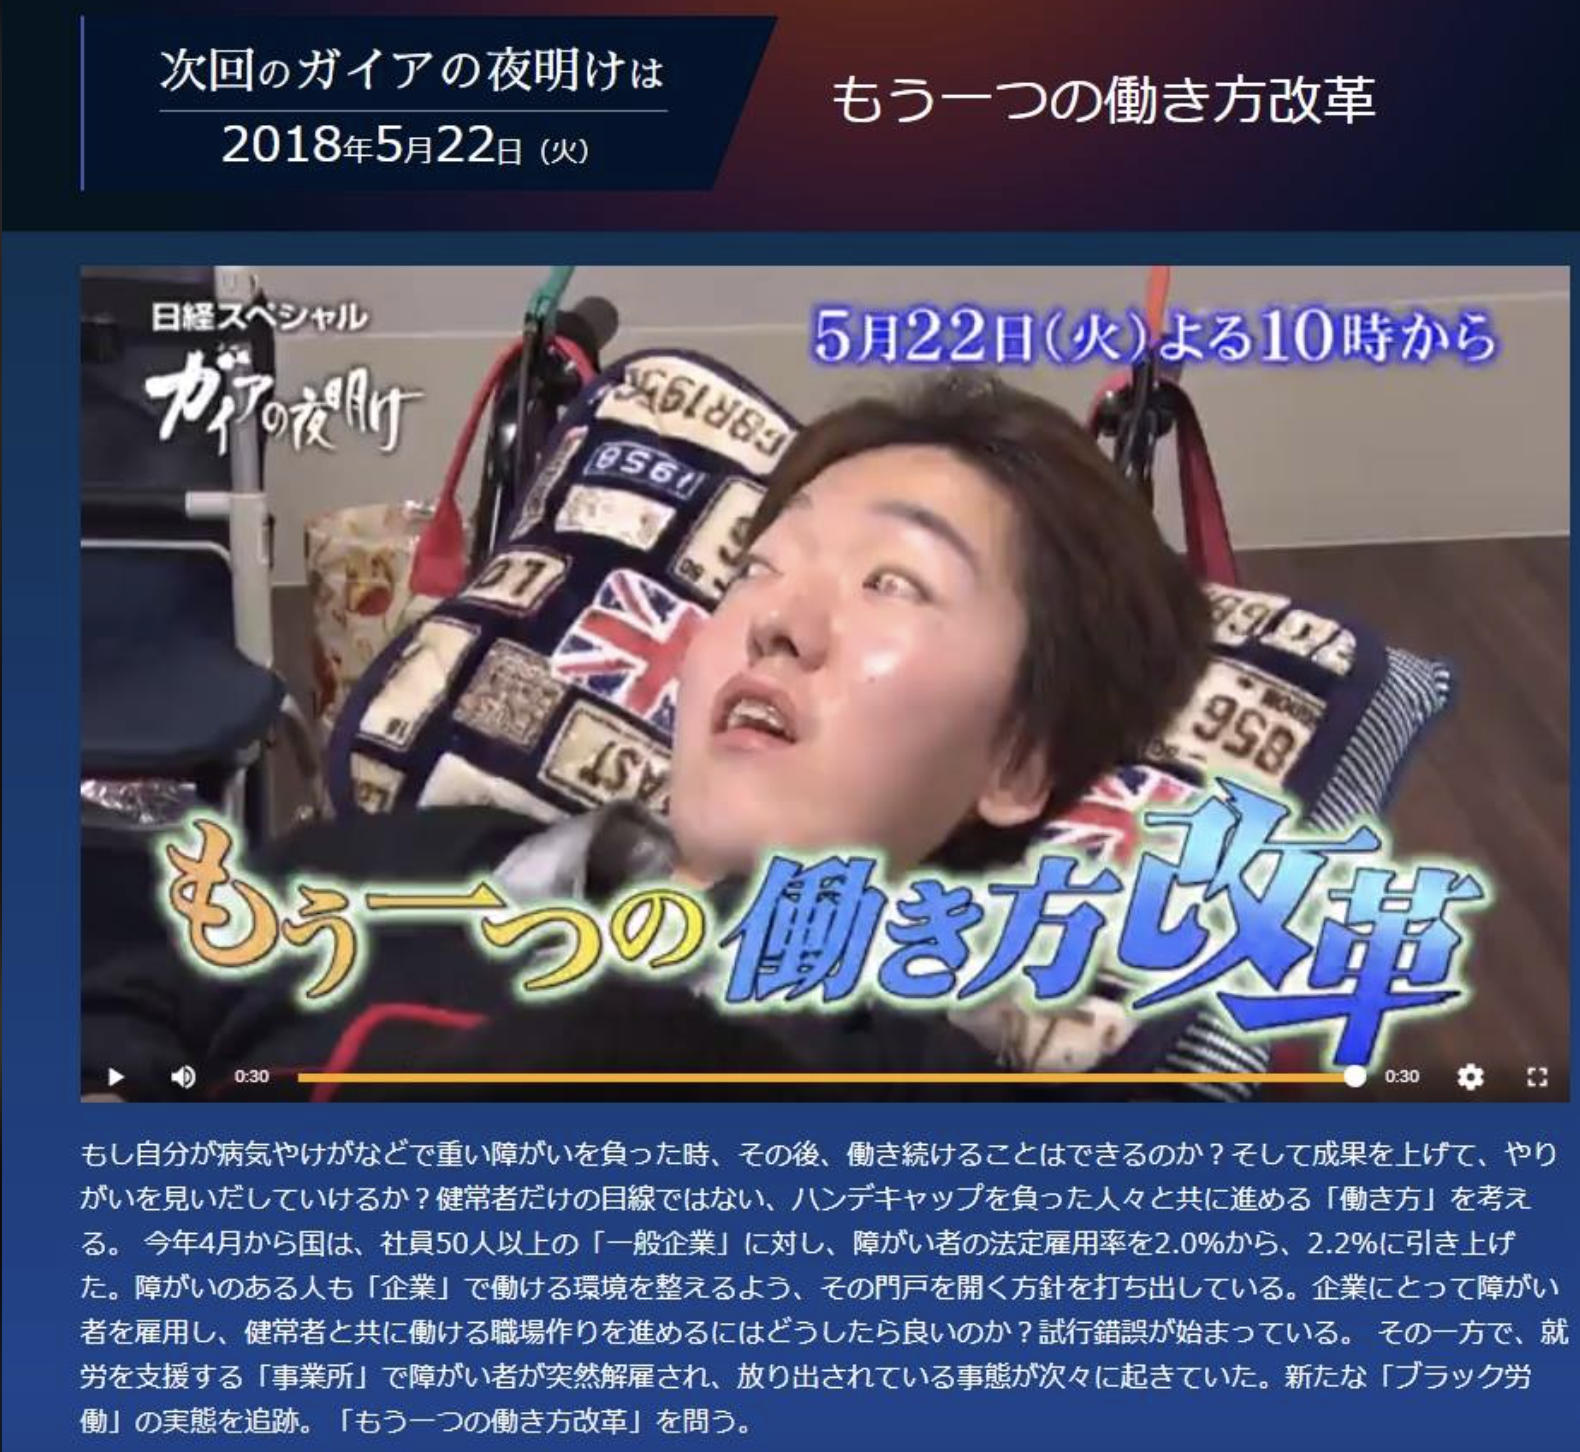 Hisamu-san's feature on a TV show